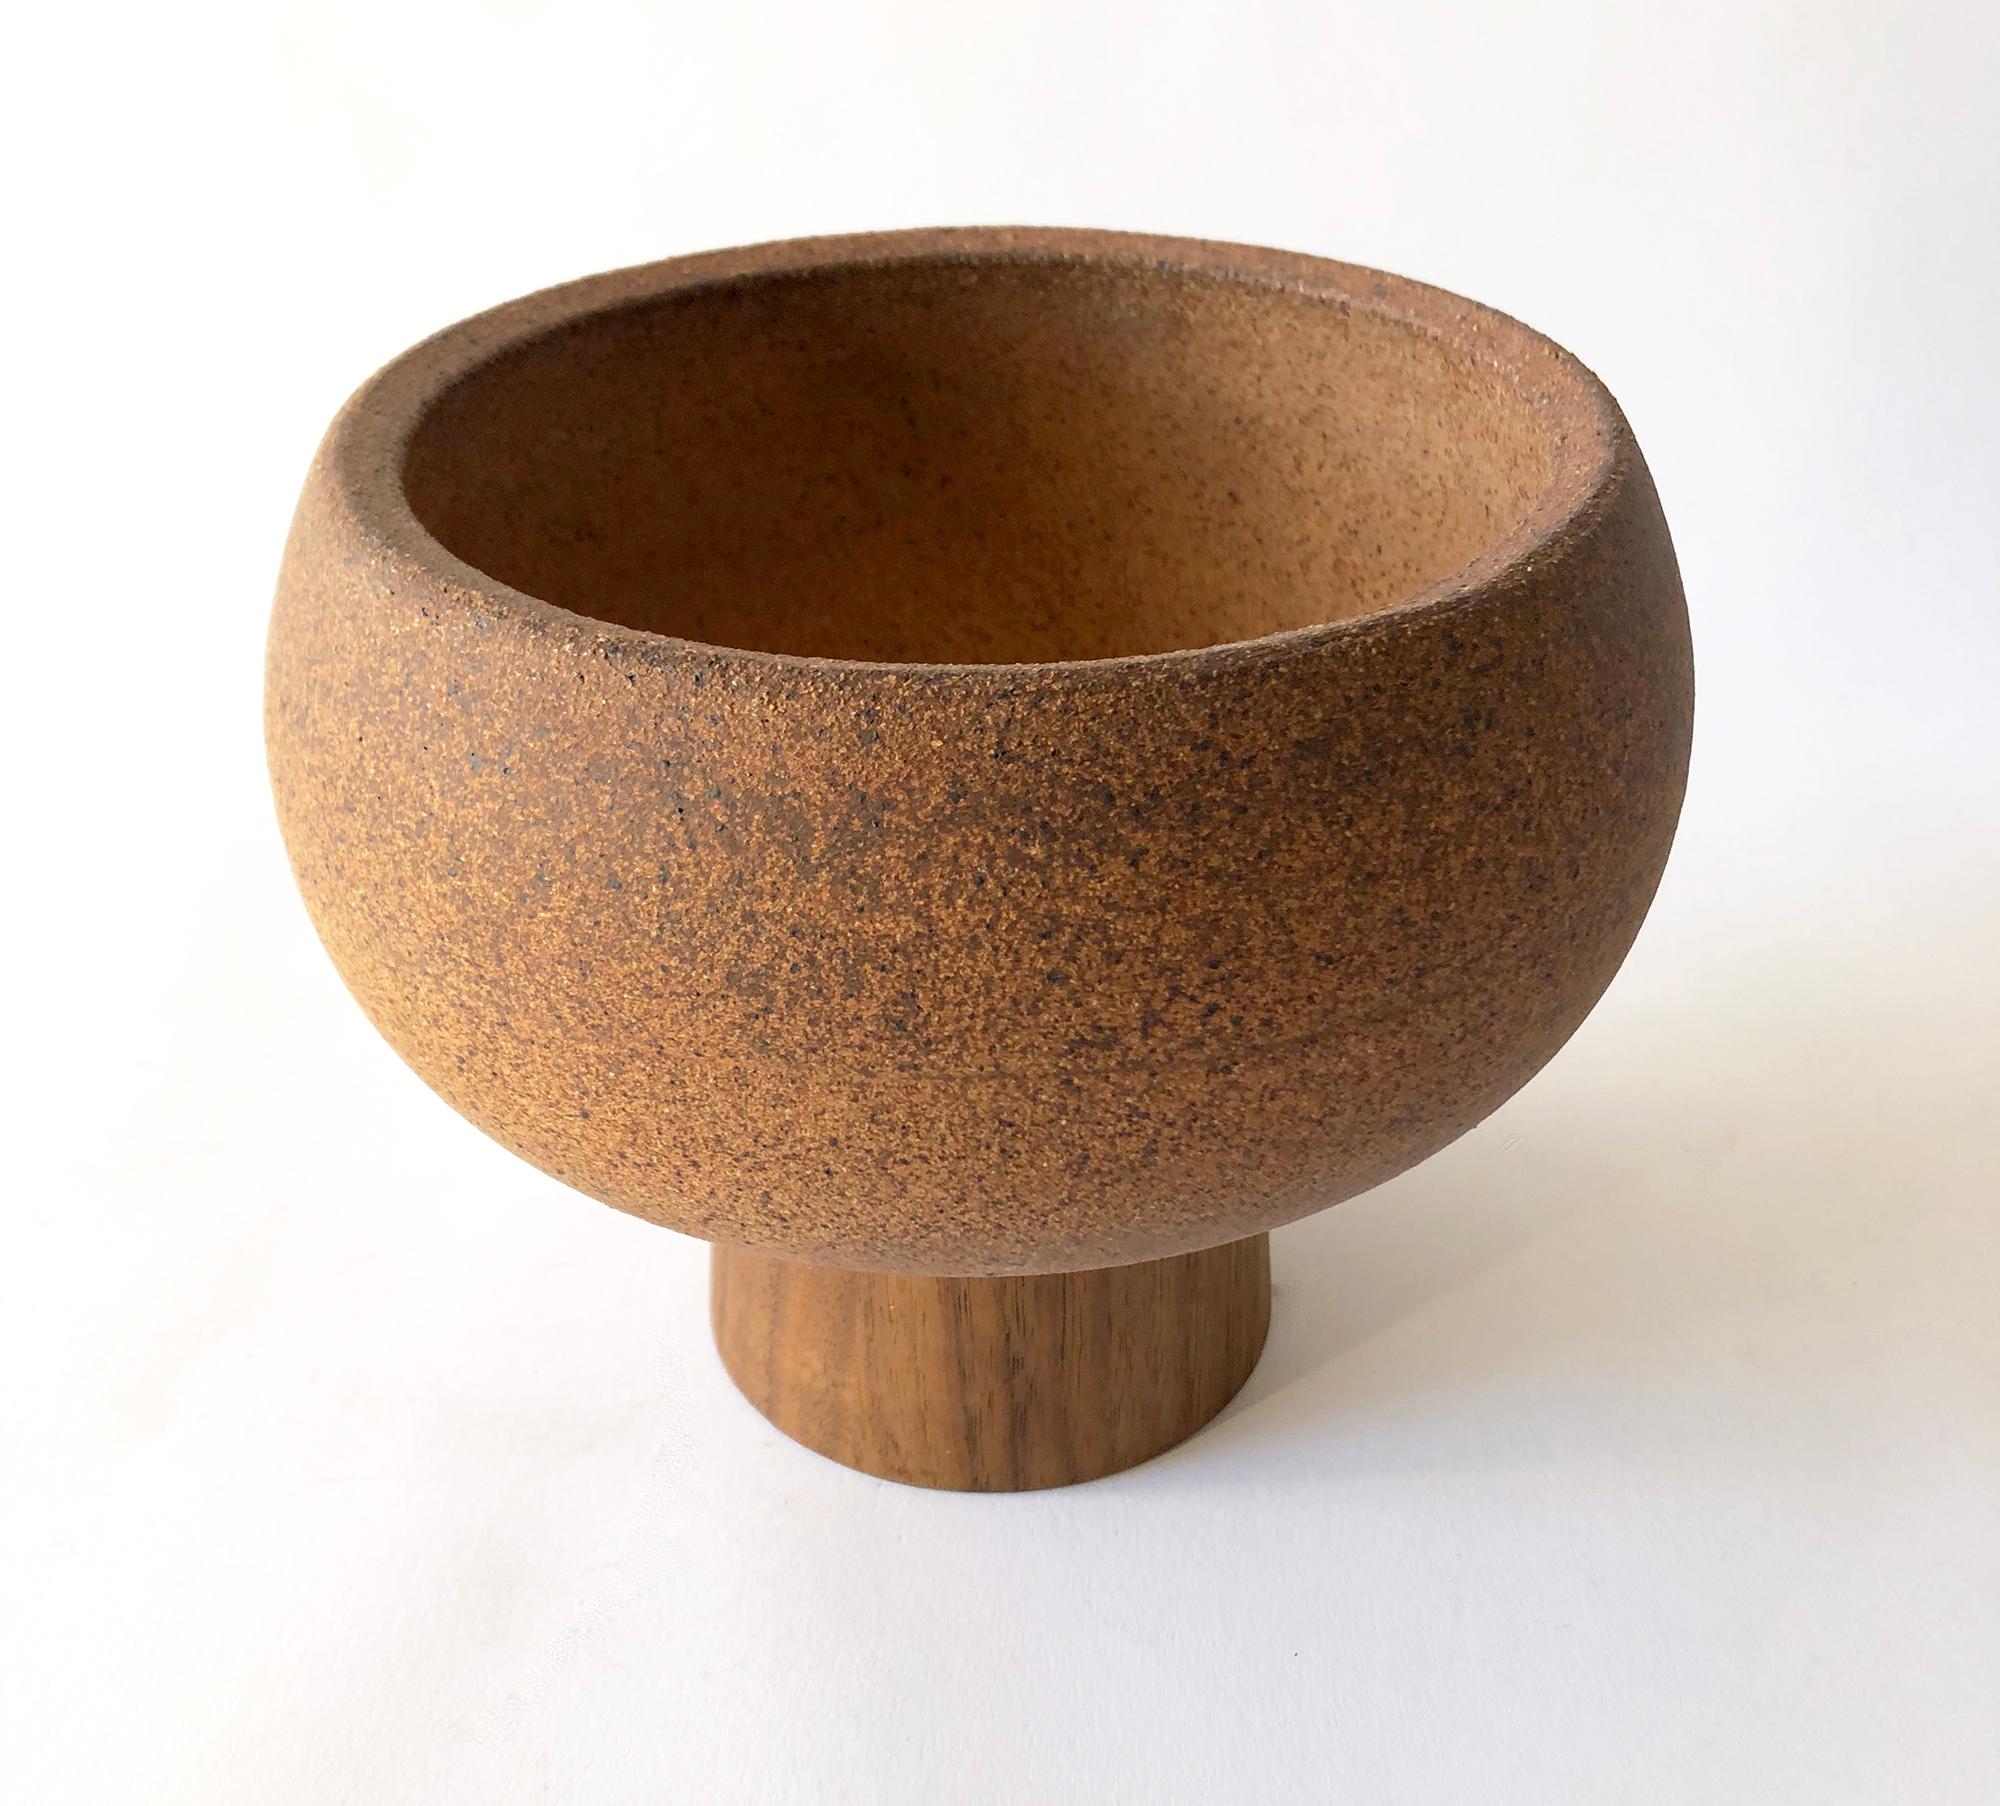 Rare, fine stoneware compote bowl with walnut base created by David Cressey for Architectural Pottery. Stoneware looks like cork, it is so fine. Bowl has an overall measurement of 6